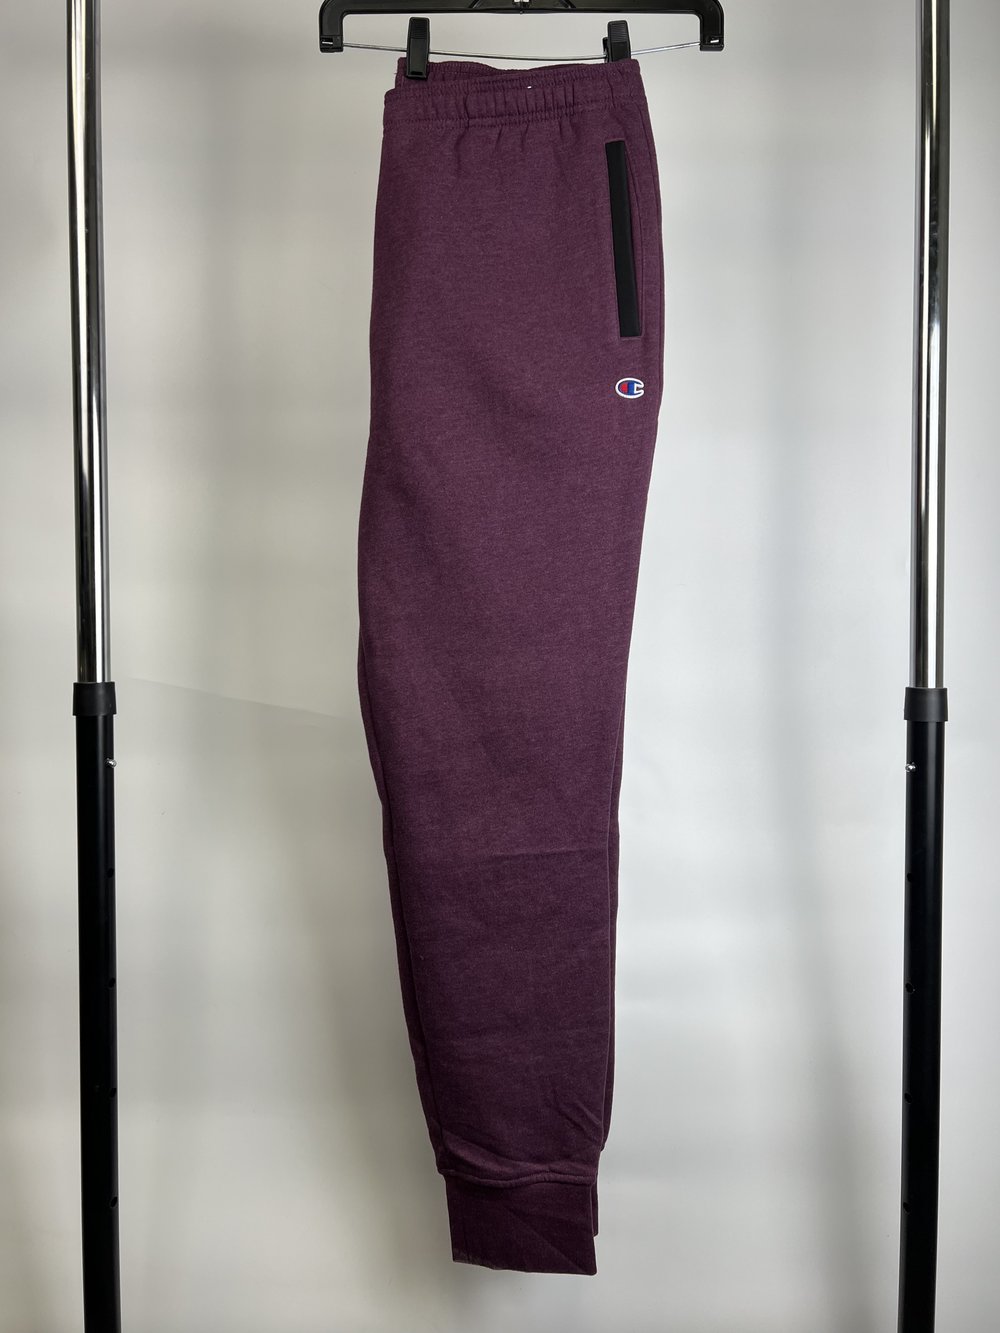 Men's Champion Joggers, Burgundy - Sizes L / XL — Fashion Cents Consignment  & Thrift Stores in Ephrata, Strasburg, East Earl, Morgantown PA